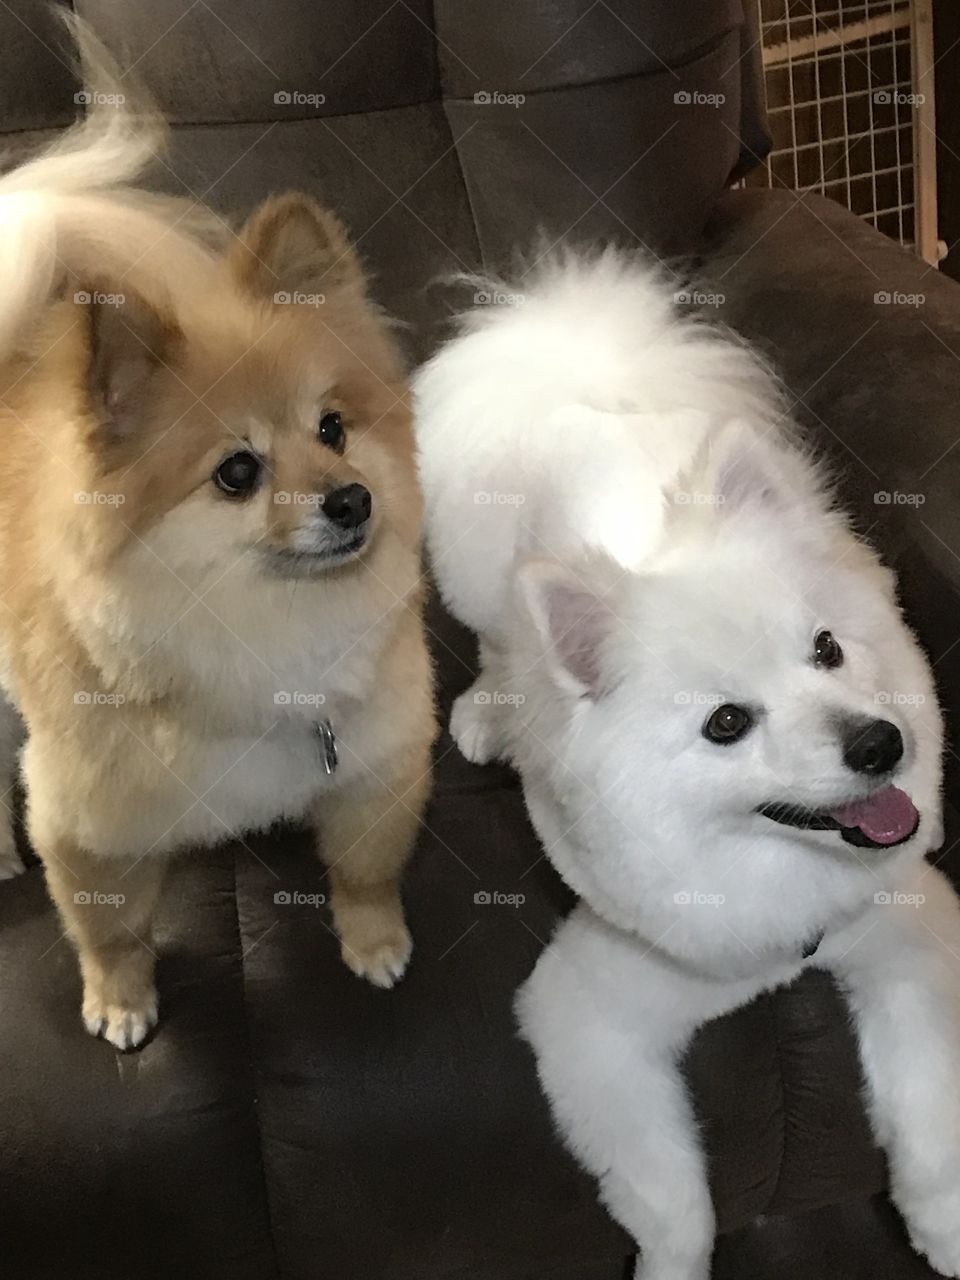 Freshly groomed red Pomeranian and white miniature American Eskimo dogs sitting together in a recliner